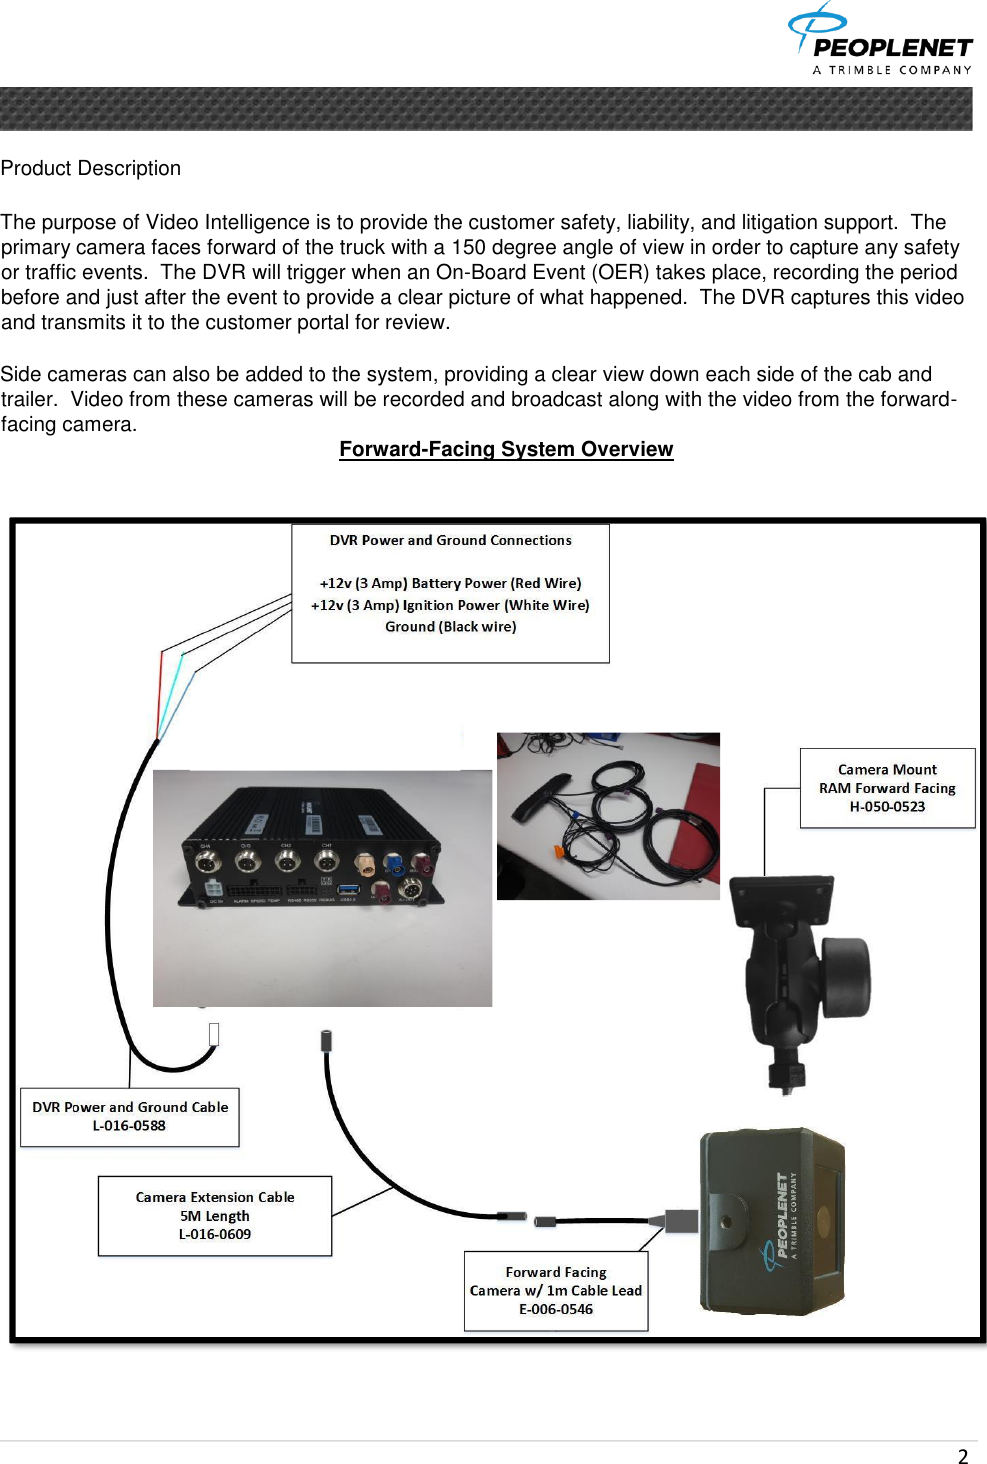  2      Product Description   The purpose of Video Intelligence is to provide the customer safety, liability, and litigation support.  The primary camera faces forward of the truck with a 150 degree angle of view in order to capture any safety or traffic events.  The DVR will trigger when an On-Board Event (OER) takes place, recording the period before and just after the event to provide a clear picture of what happened.  The DVR captures this video and transmits it to the customer portal for review.  Side cameras can also be added to the system, providing a clear view down each side of the cab and trailer.  Video from these cameras will be recorded and broadcast along with the video from the forward-facing camera.  Forward-Facing System Overview    